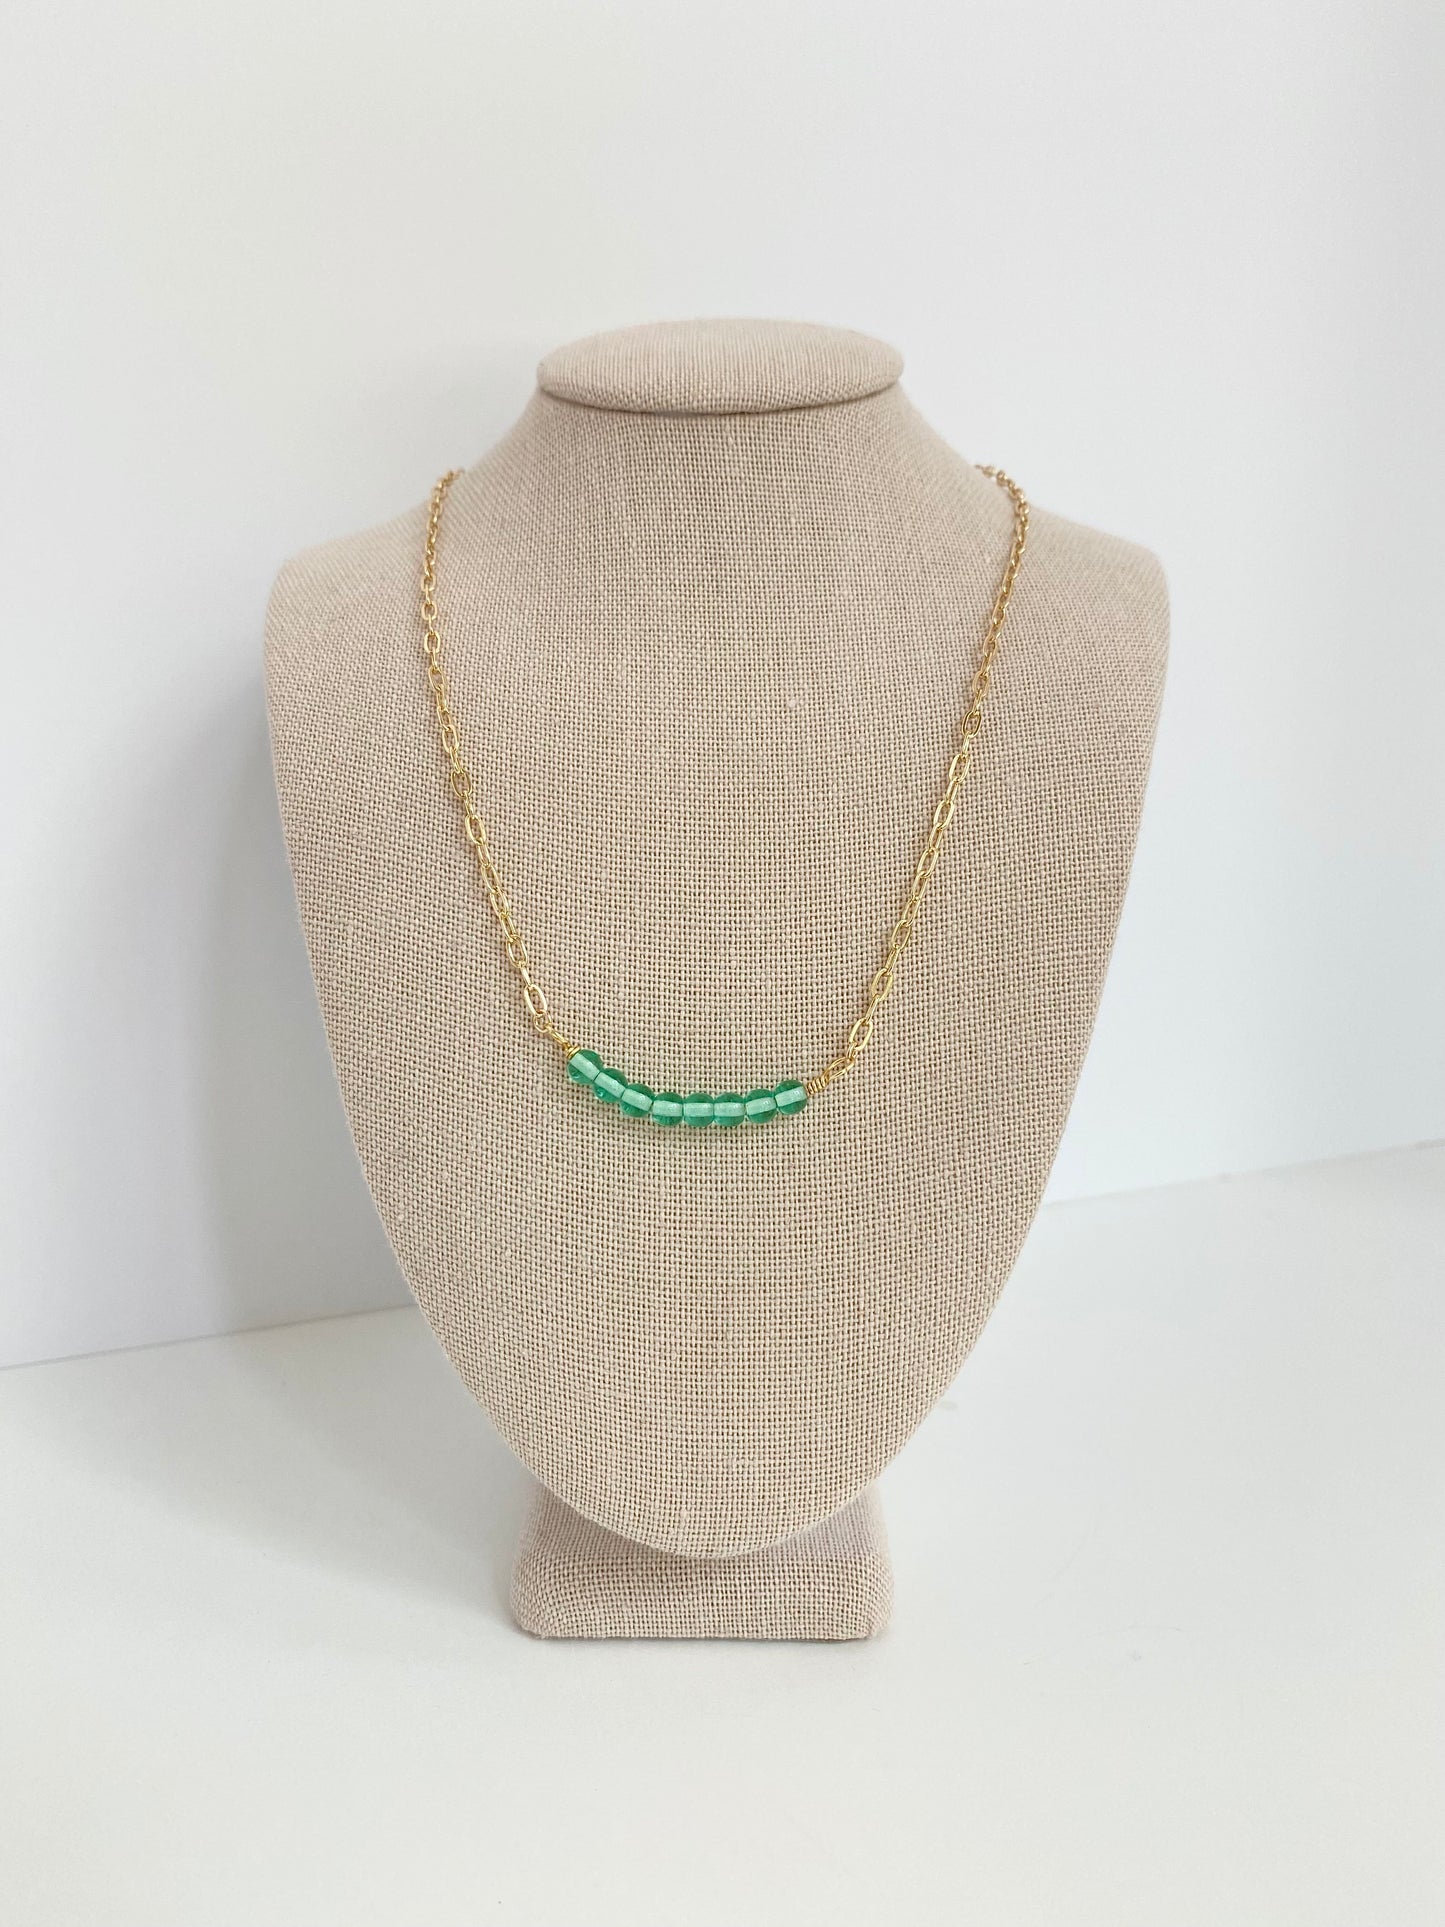 Perfect Layering Necklace